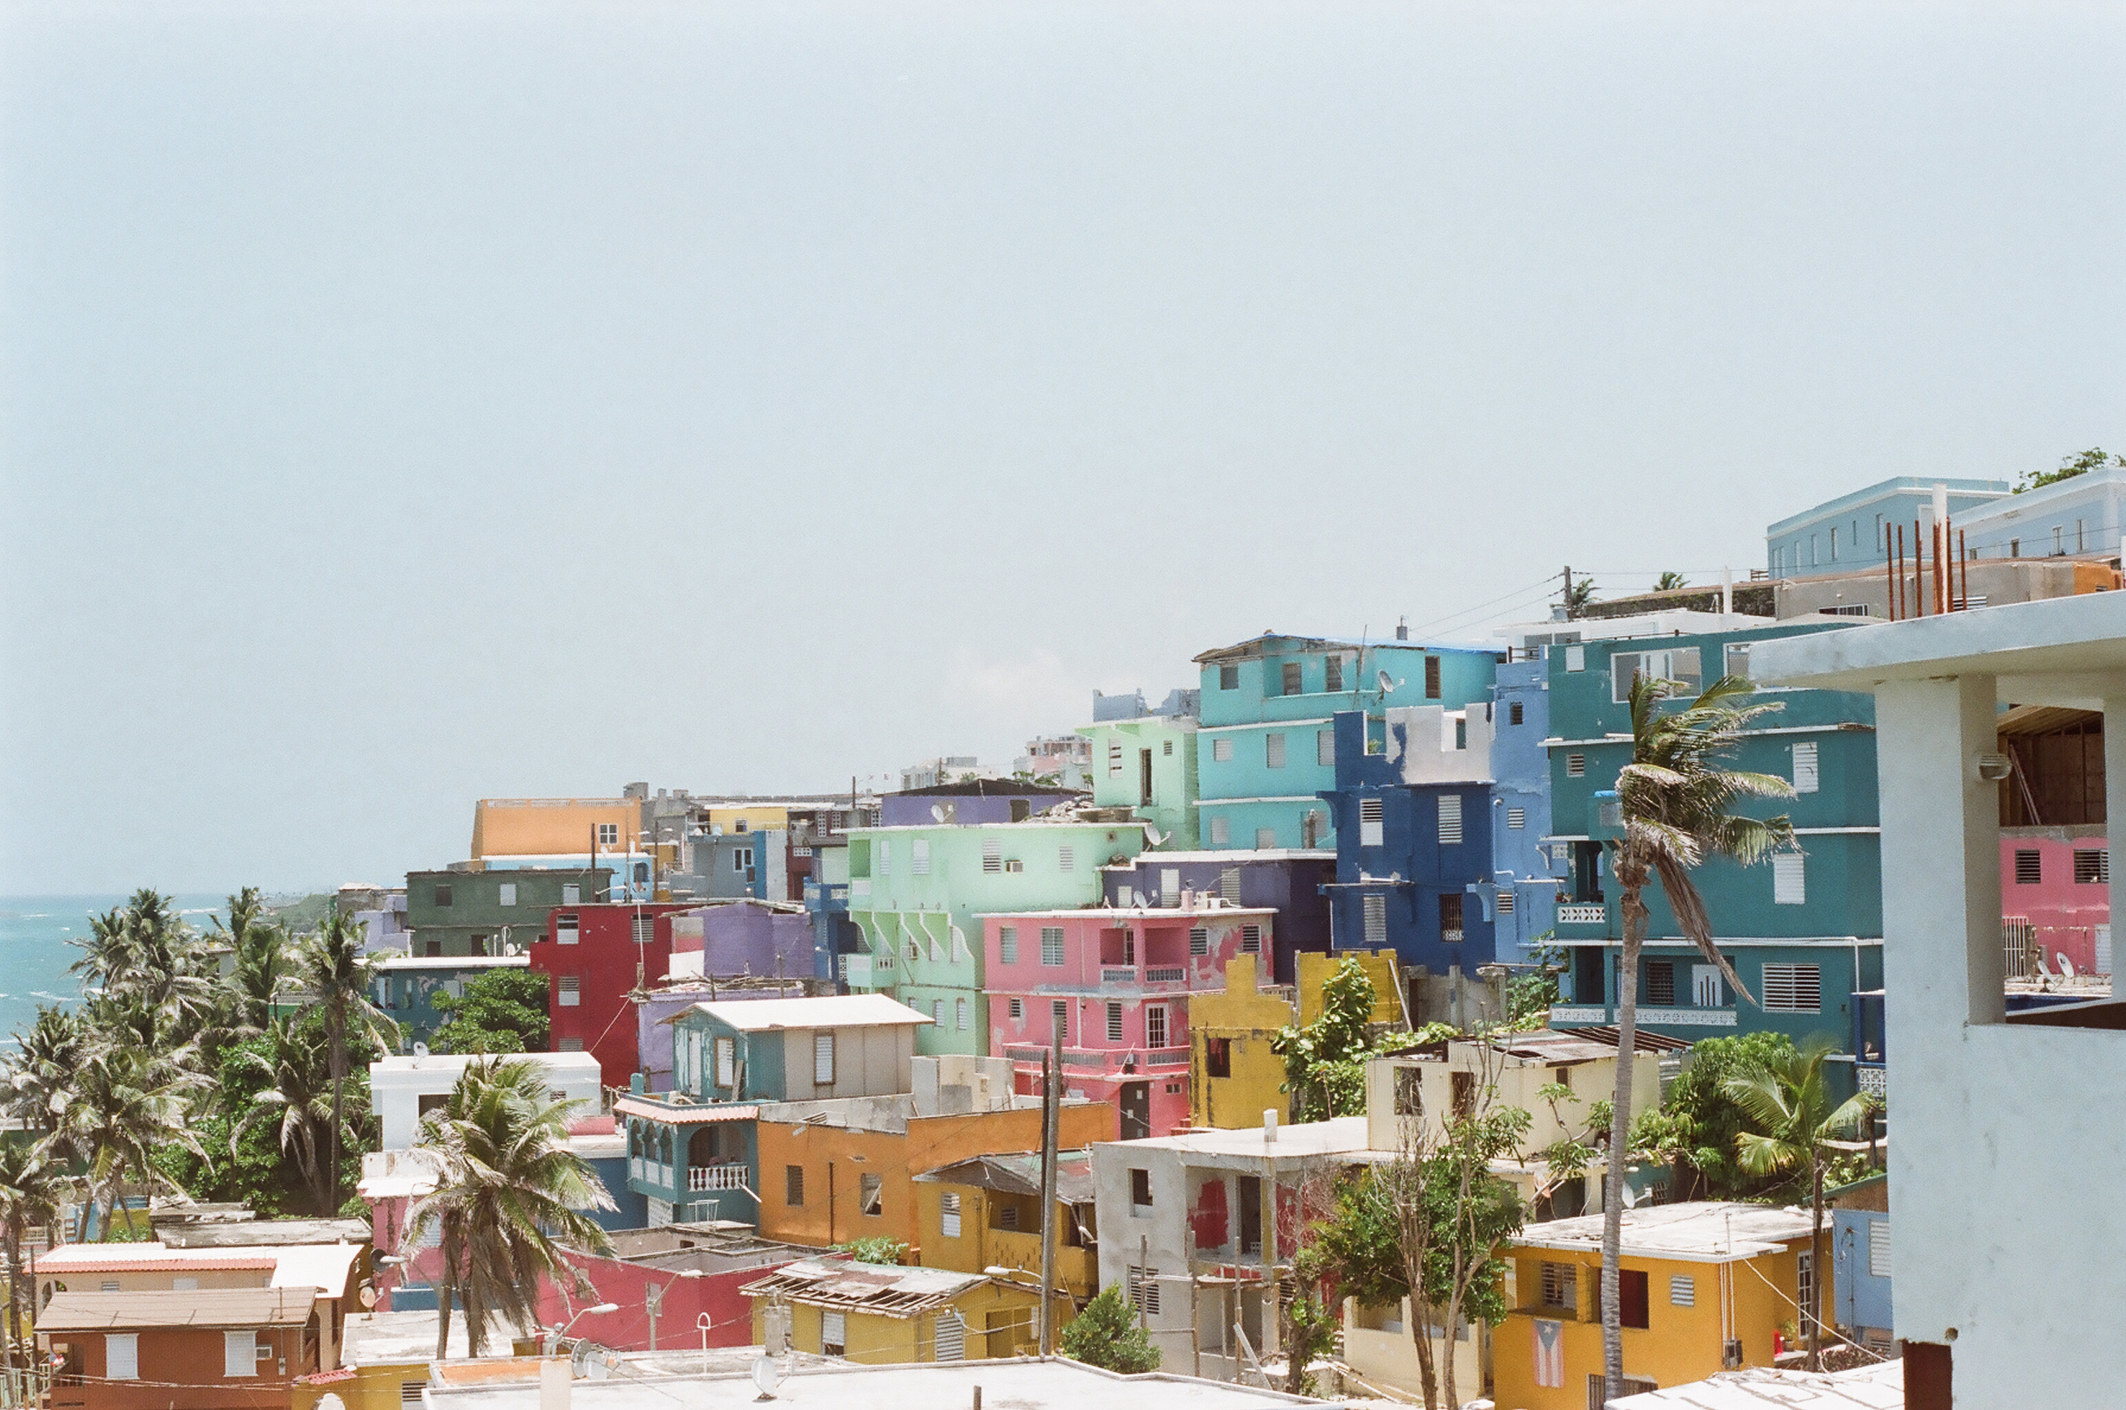 Colorful houses on the coast.